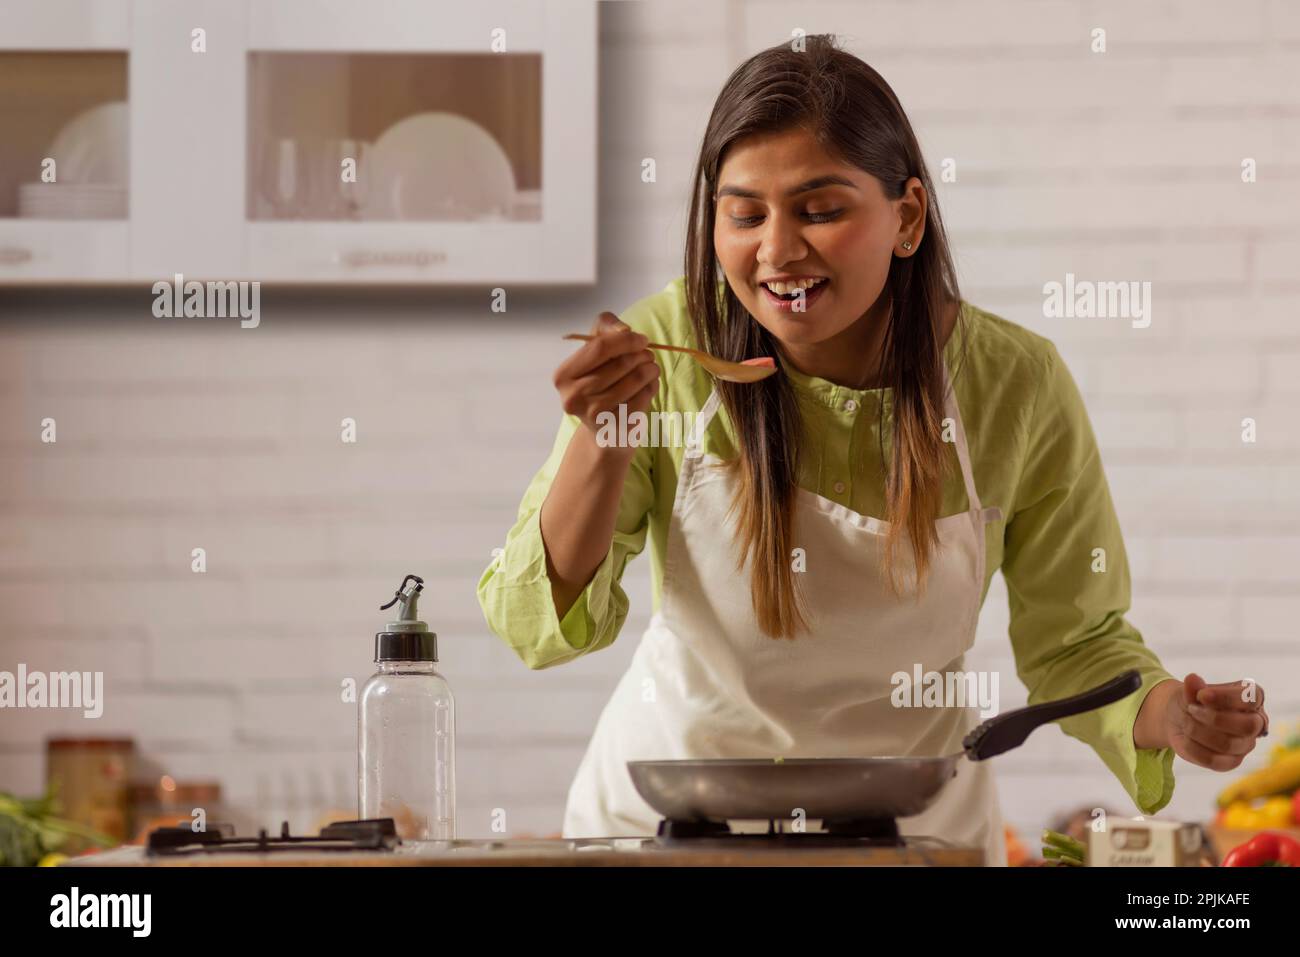 Portrait of cheerful woman cooking in kitchen Stock Photo